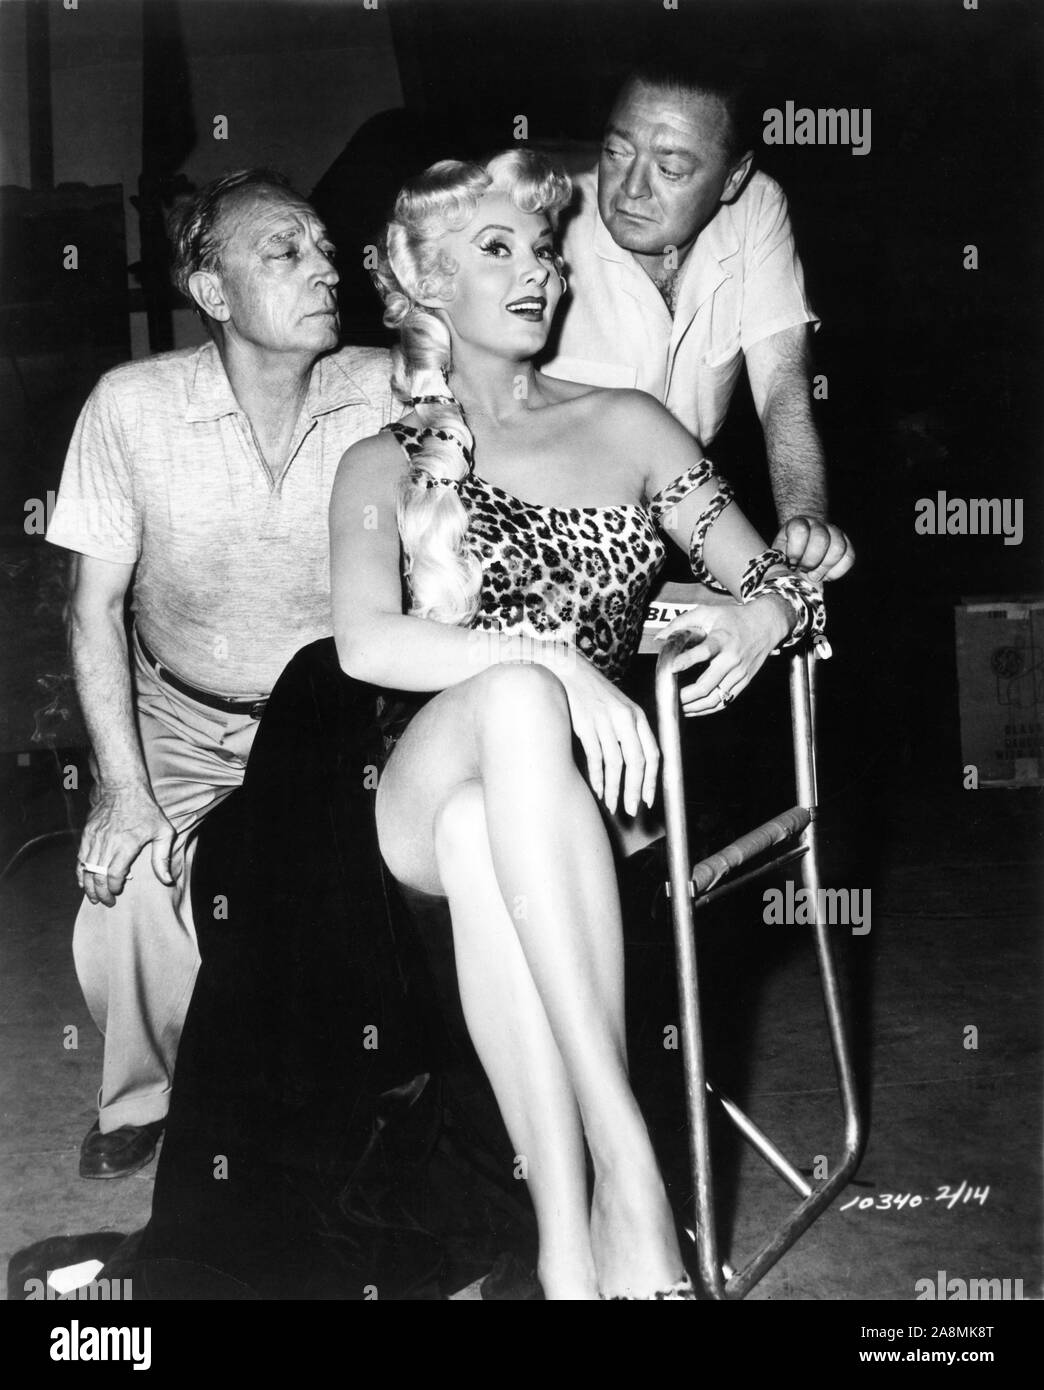 BUSTER KEATON on set candid with RHONDA FLEMING and PETER LORRE during filming of THE BUSTER KEATON STORY 1957 director Sidney Sheldon VistaVision Forum Productions / Paramount Pictures Stock Photo